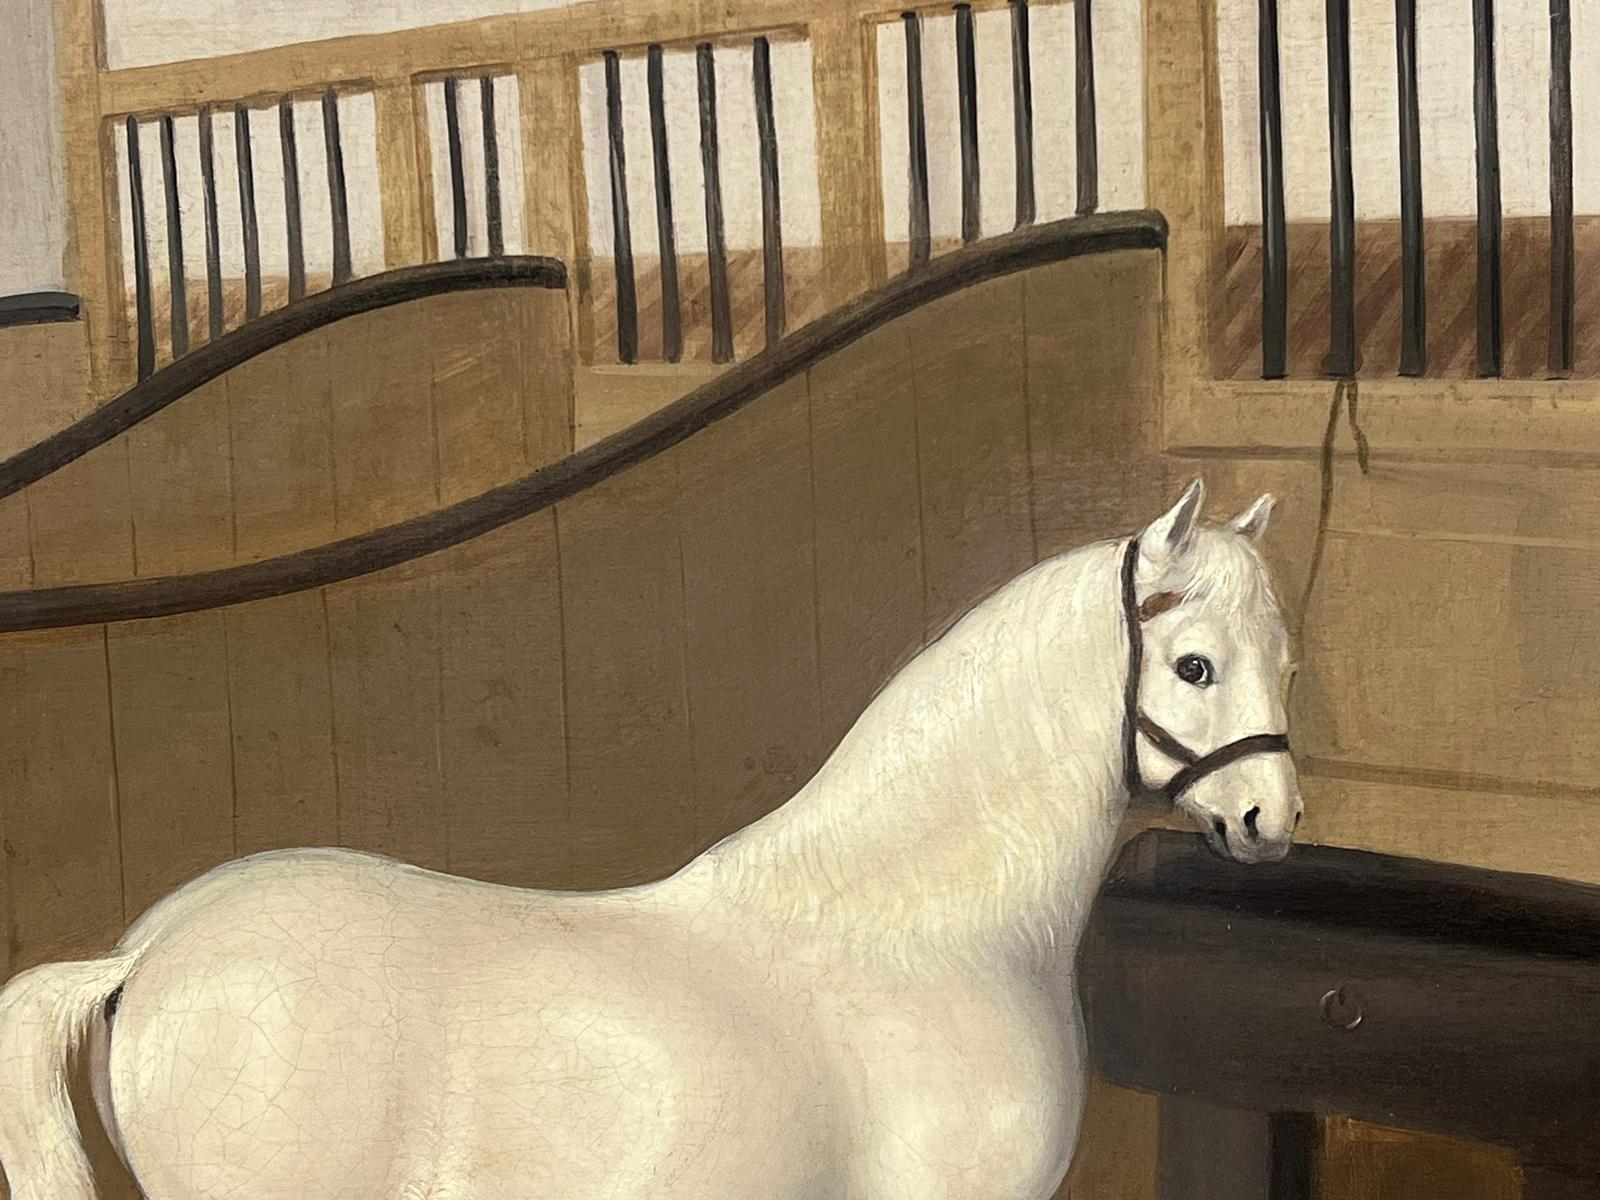 The White Horse in the Stable
English School, indistinctly signed lower right
dated 1842
signed, oil on canvas, framed
framed: 24 x 29 inches
canvas : 21.5 x 26.5 inches
provenance: private collection
condition: very good and sound condition